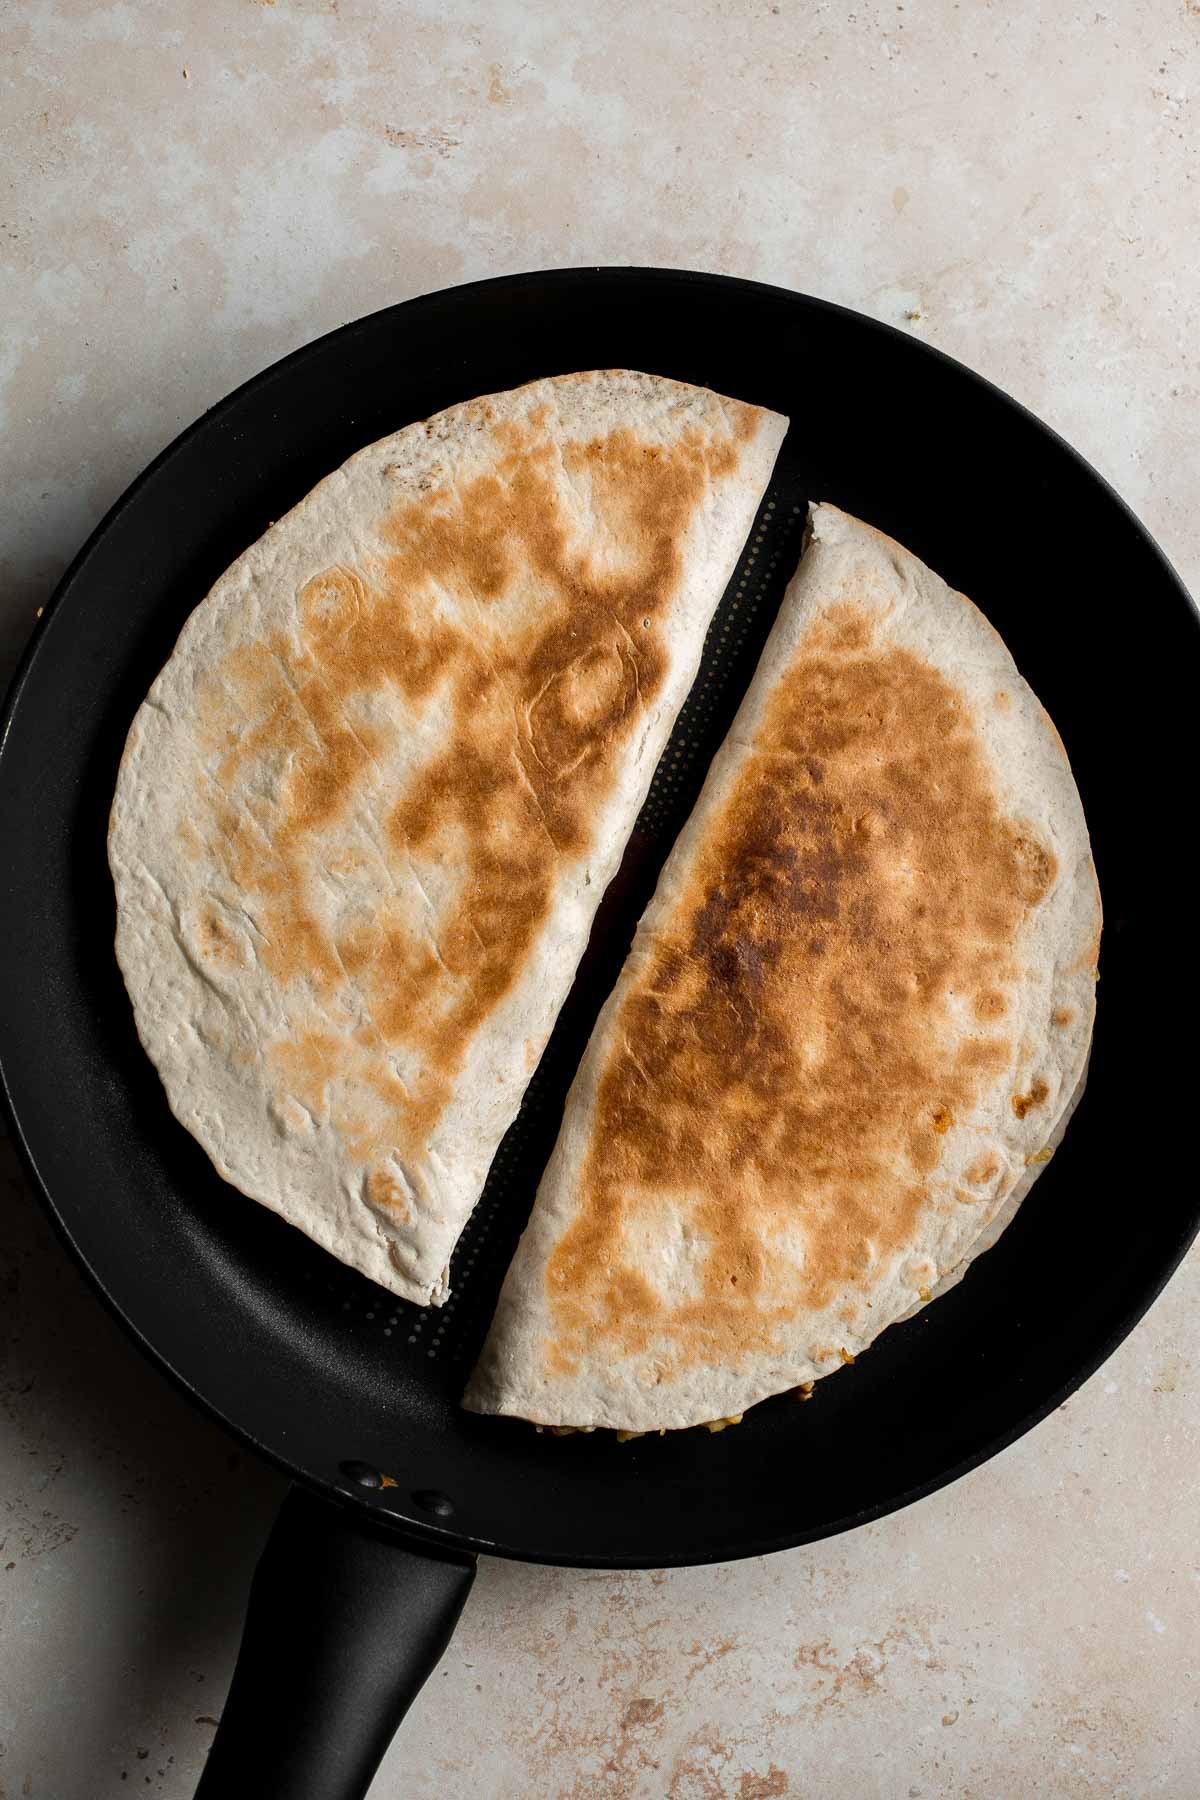 Vegetarian Breakfast Quesadillas are quick and easy to make, loaded with eggs and veggies, and flavorful. Perfect for meal prep and freezer-friendly too. | aheadofthyme.com